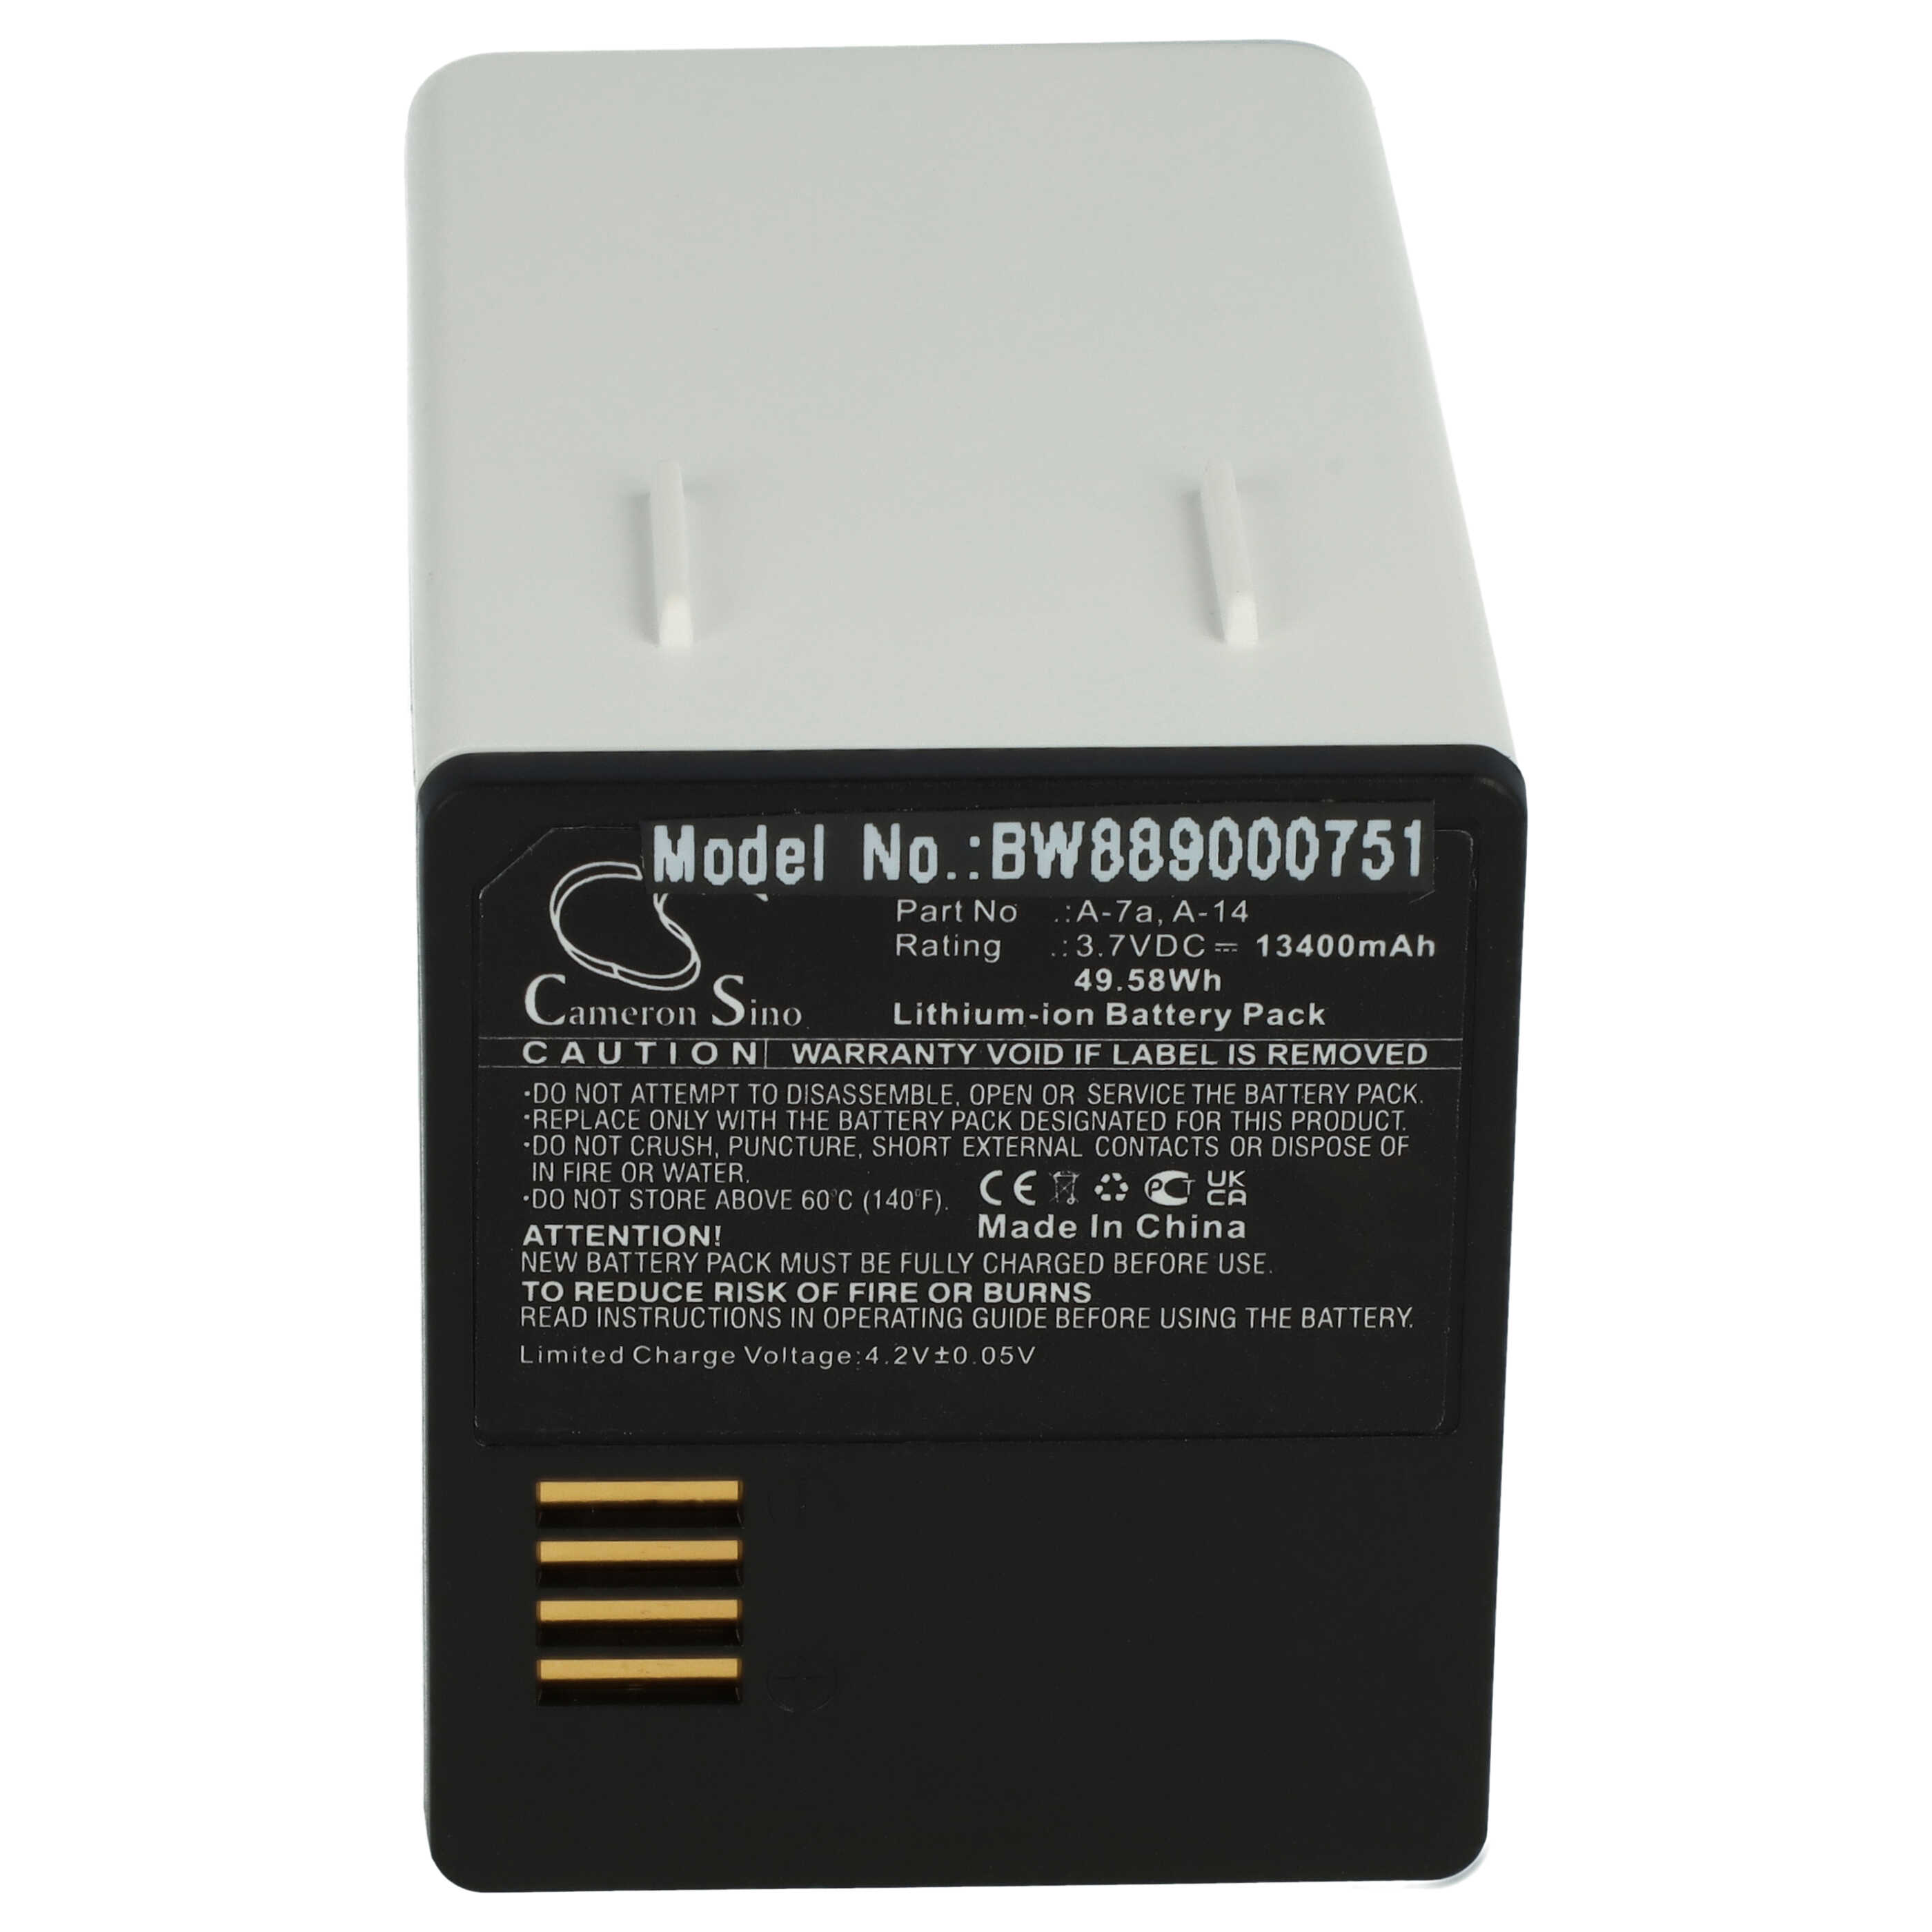 Security Camera Battery Replacement for Arlo 308-50019-01, A-14, A-7a - 13400mAh 3.7V Li-Ion